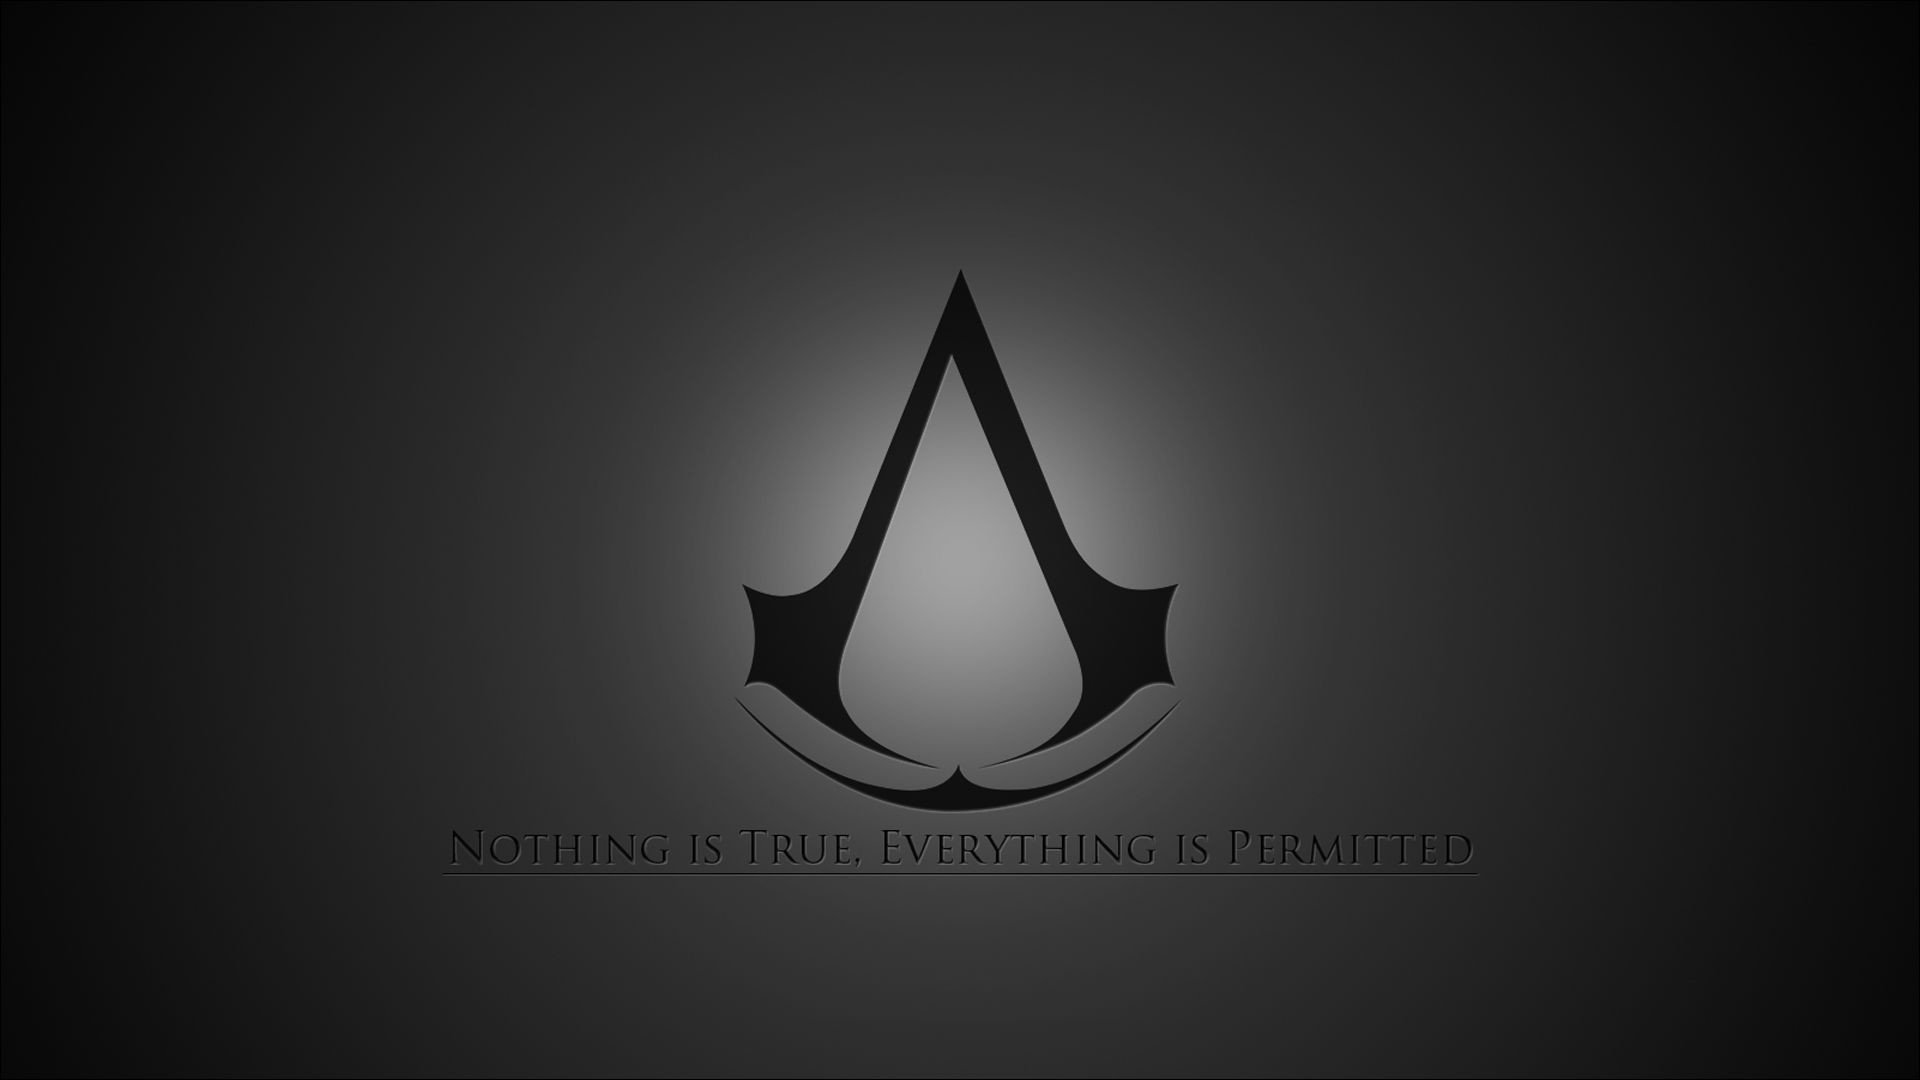 1920x1080 Gallery for - assassins creed logo wallpaper  Â· Assassins Creed  LogoEpic GamesVideo ...